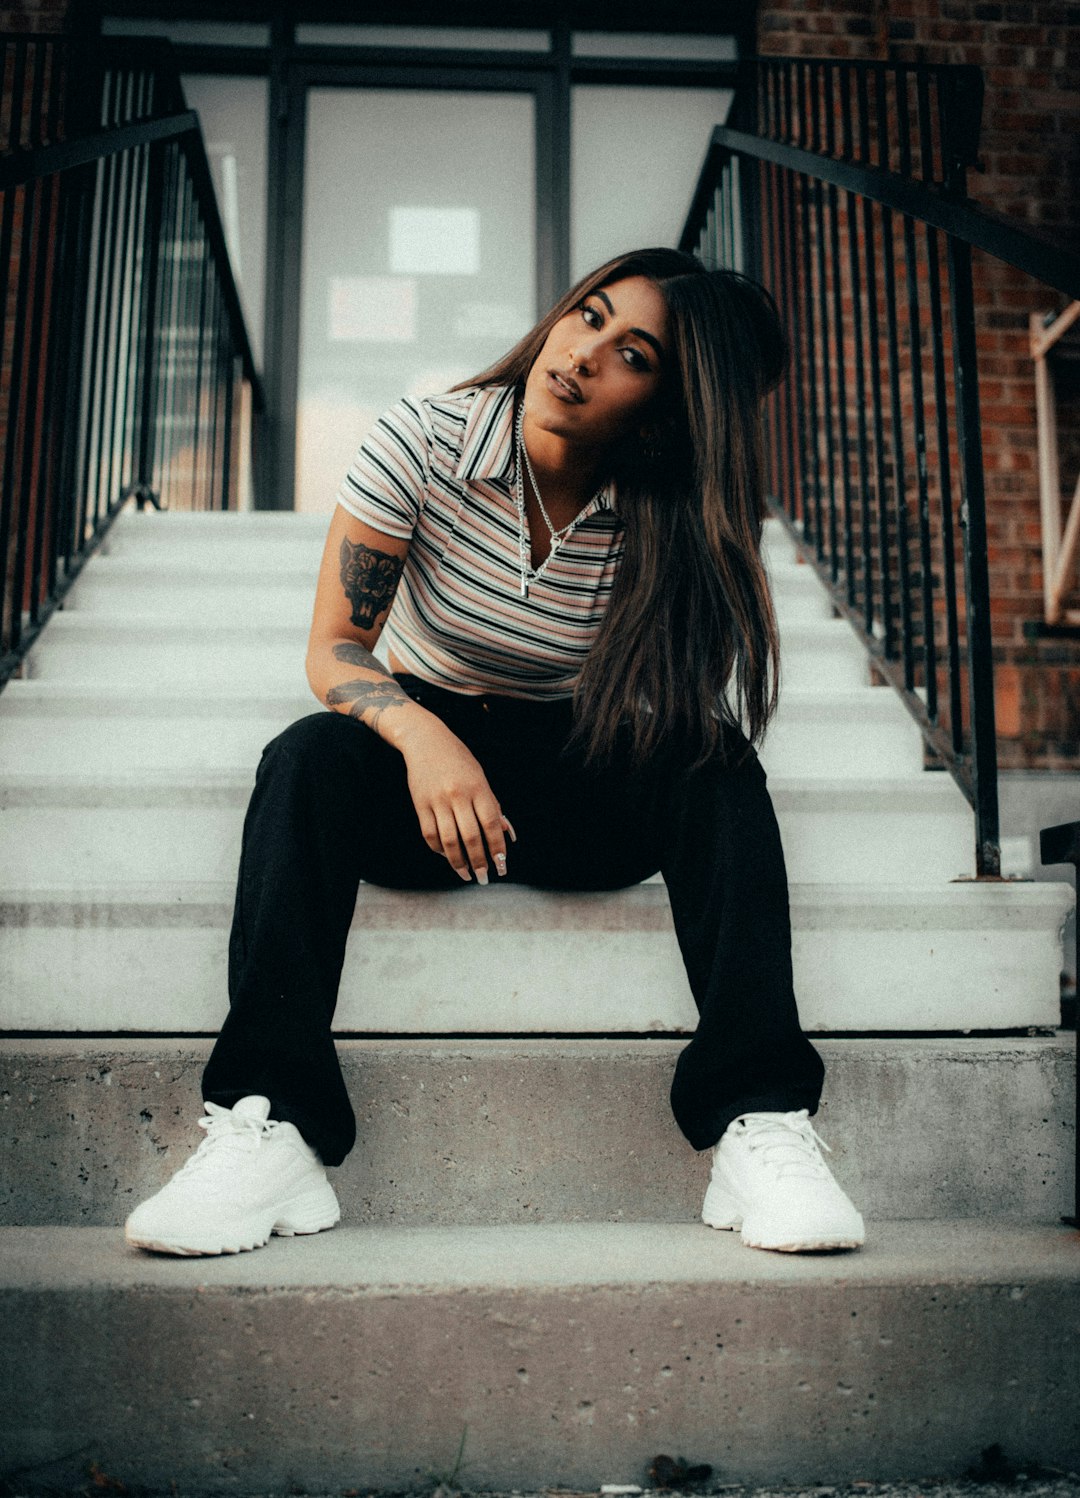 woman in black and white striped shirt and black pants sitting on concrete stairs